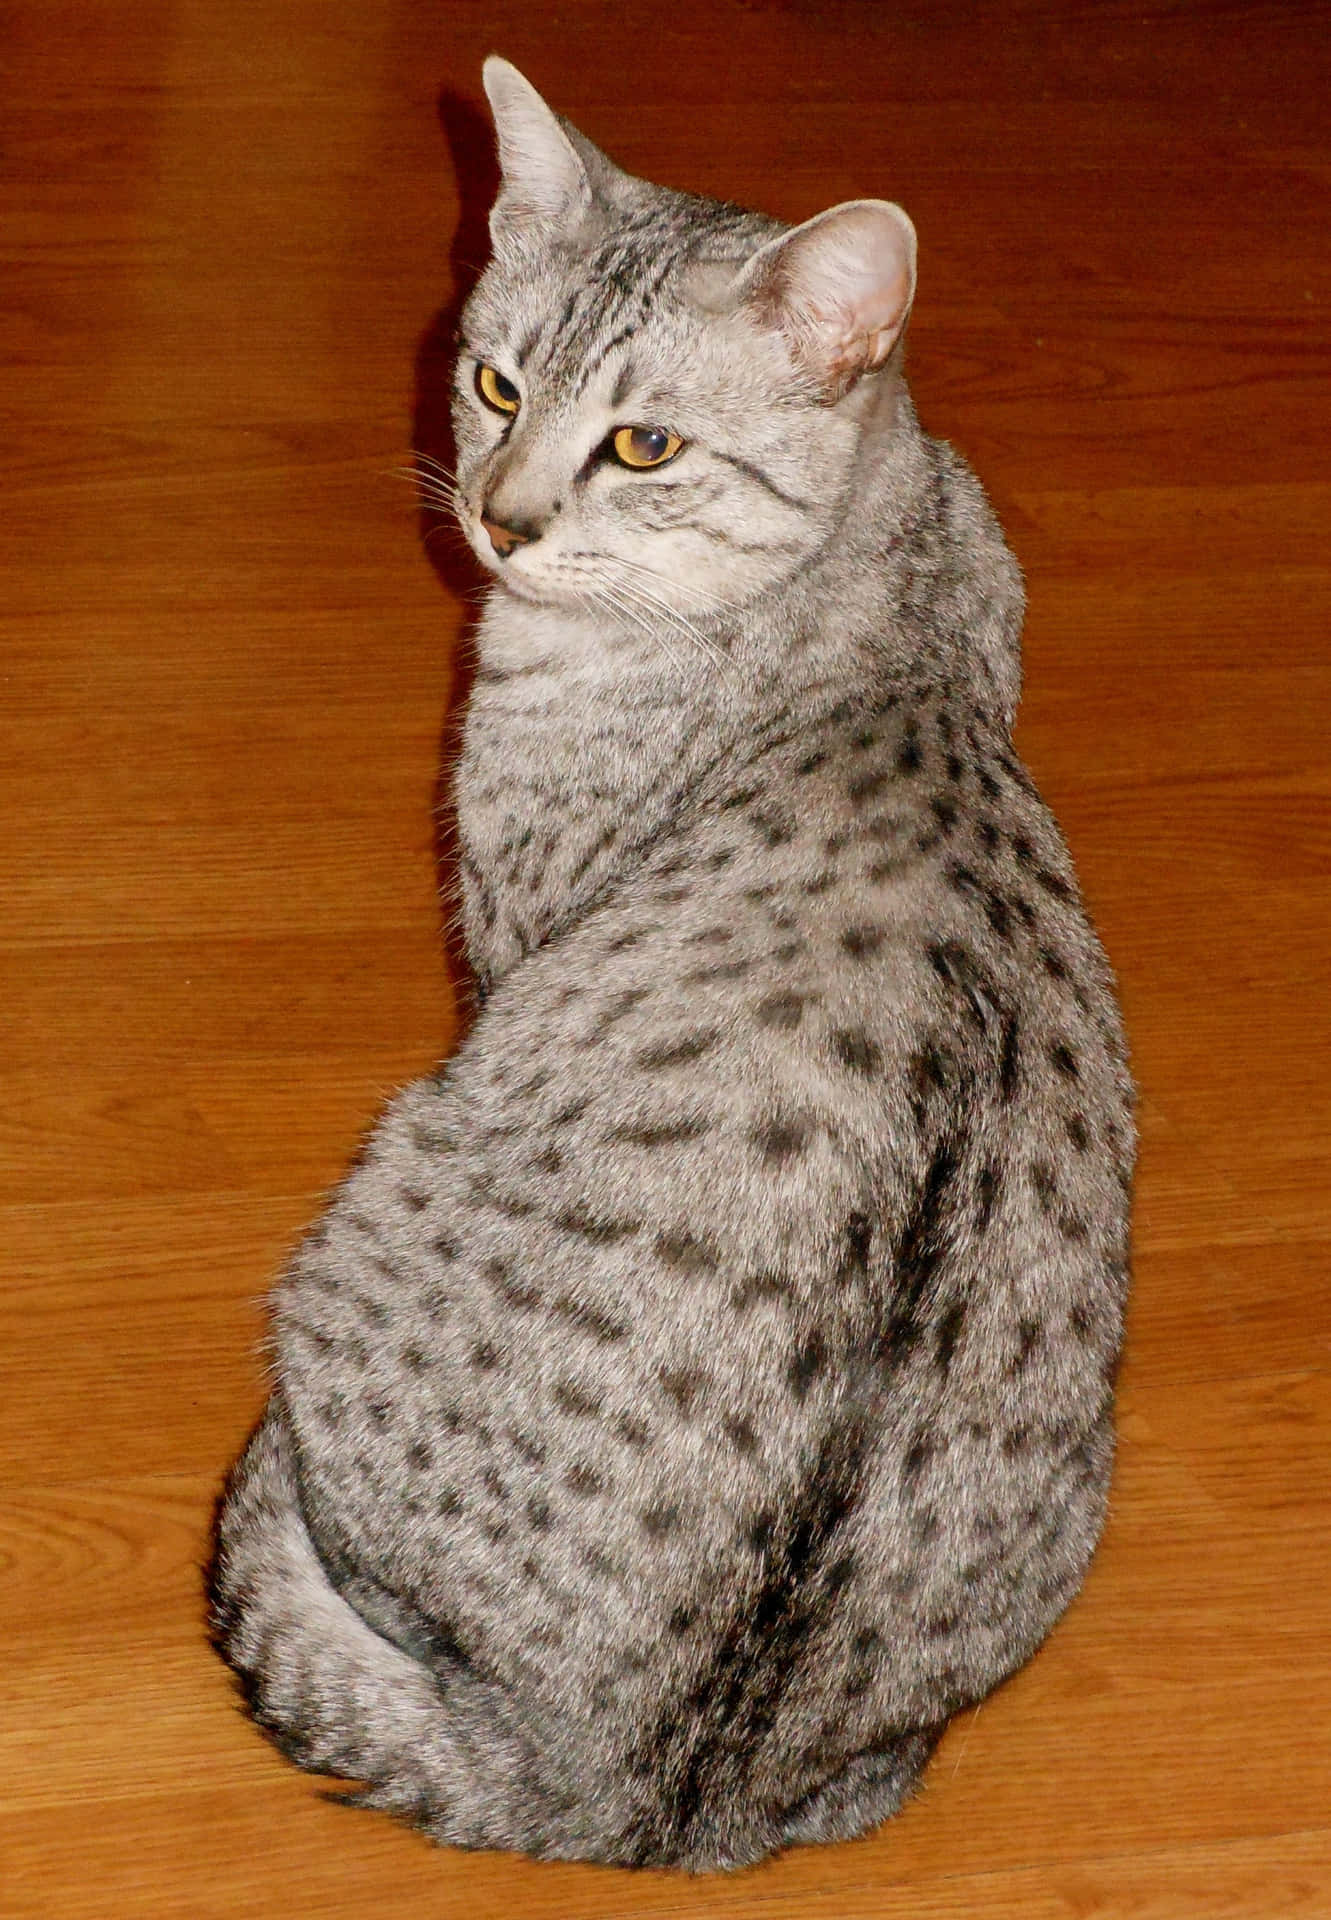 Egyptian Mau gracefully sitting in a royal pose Wallpaper